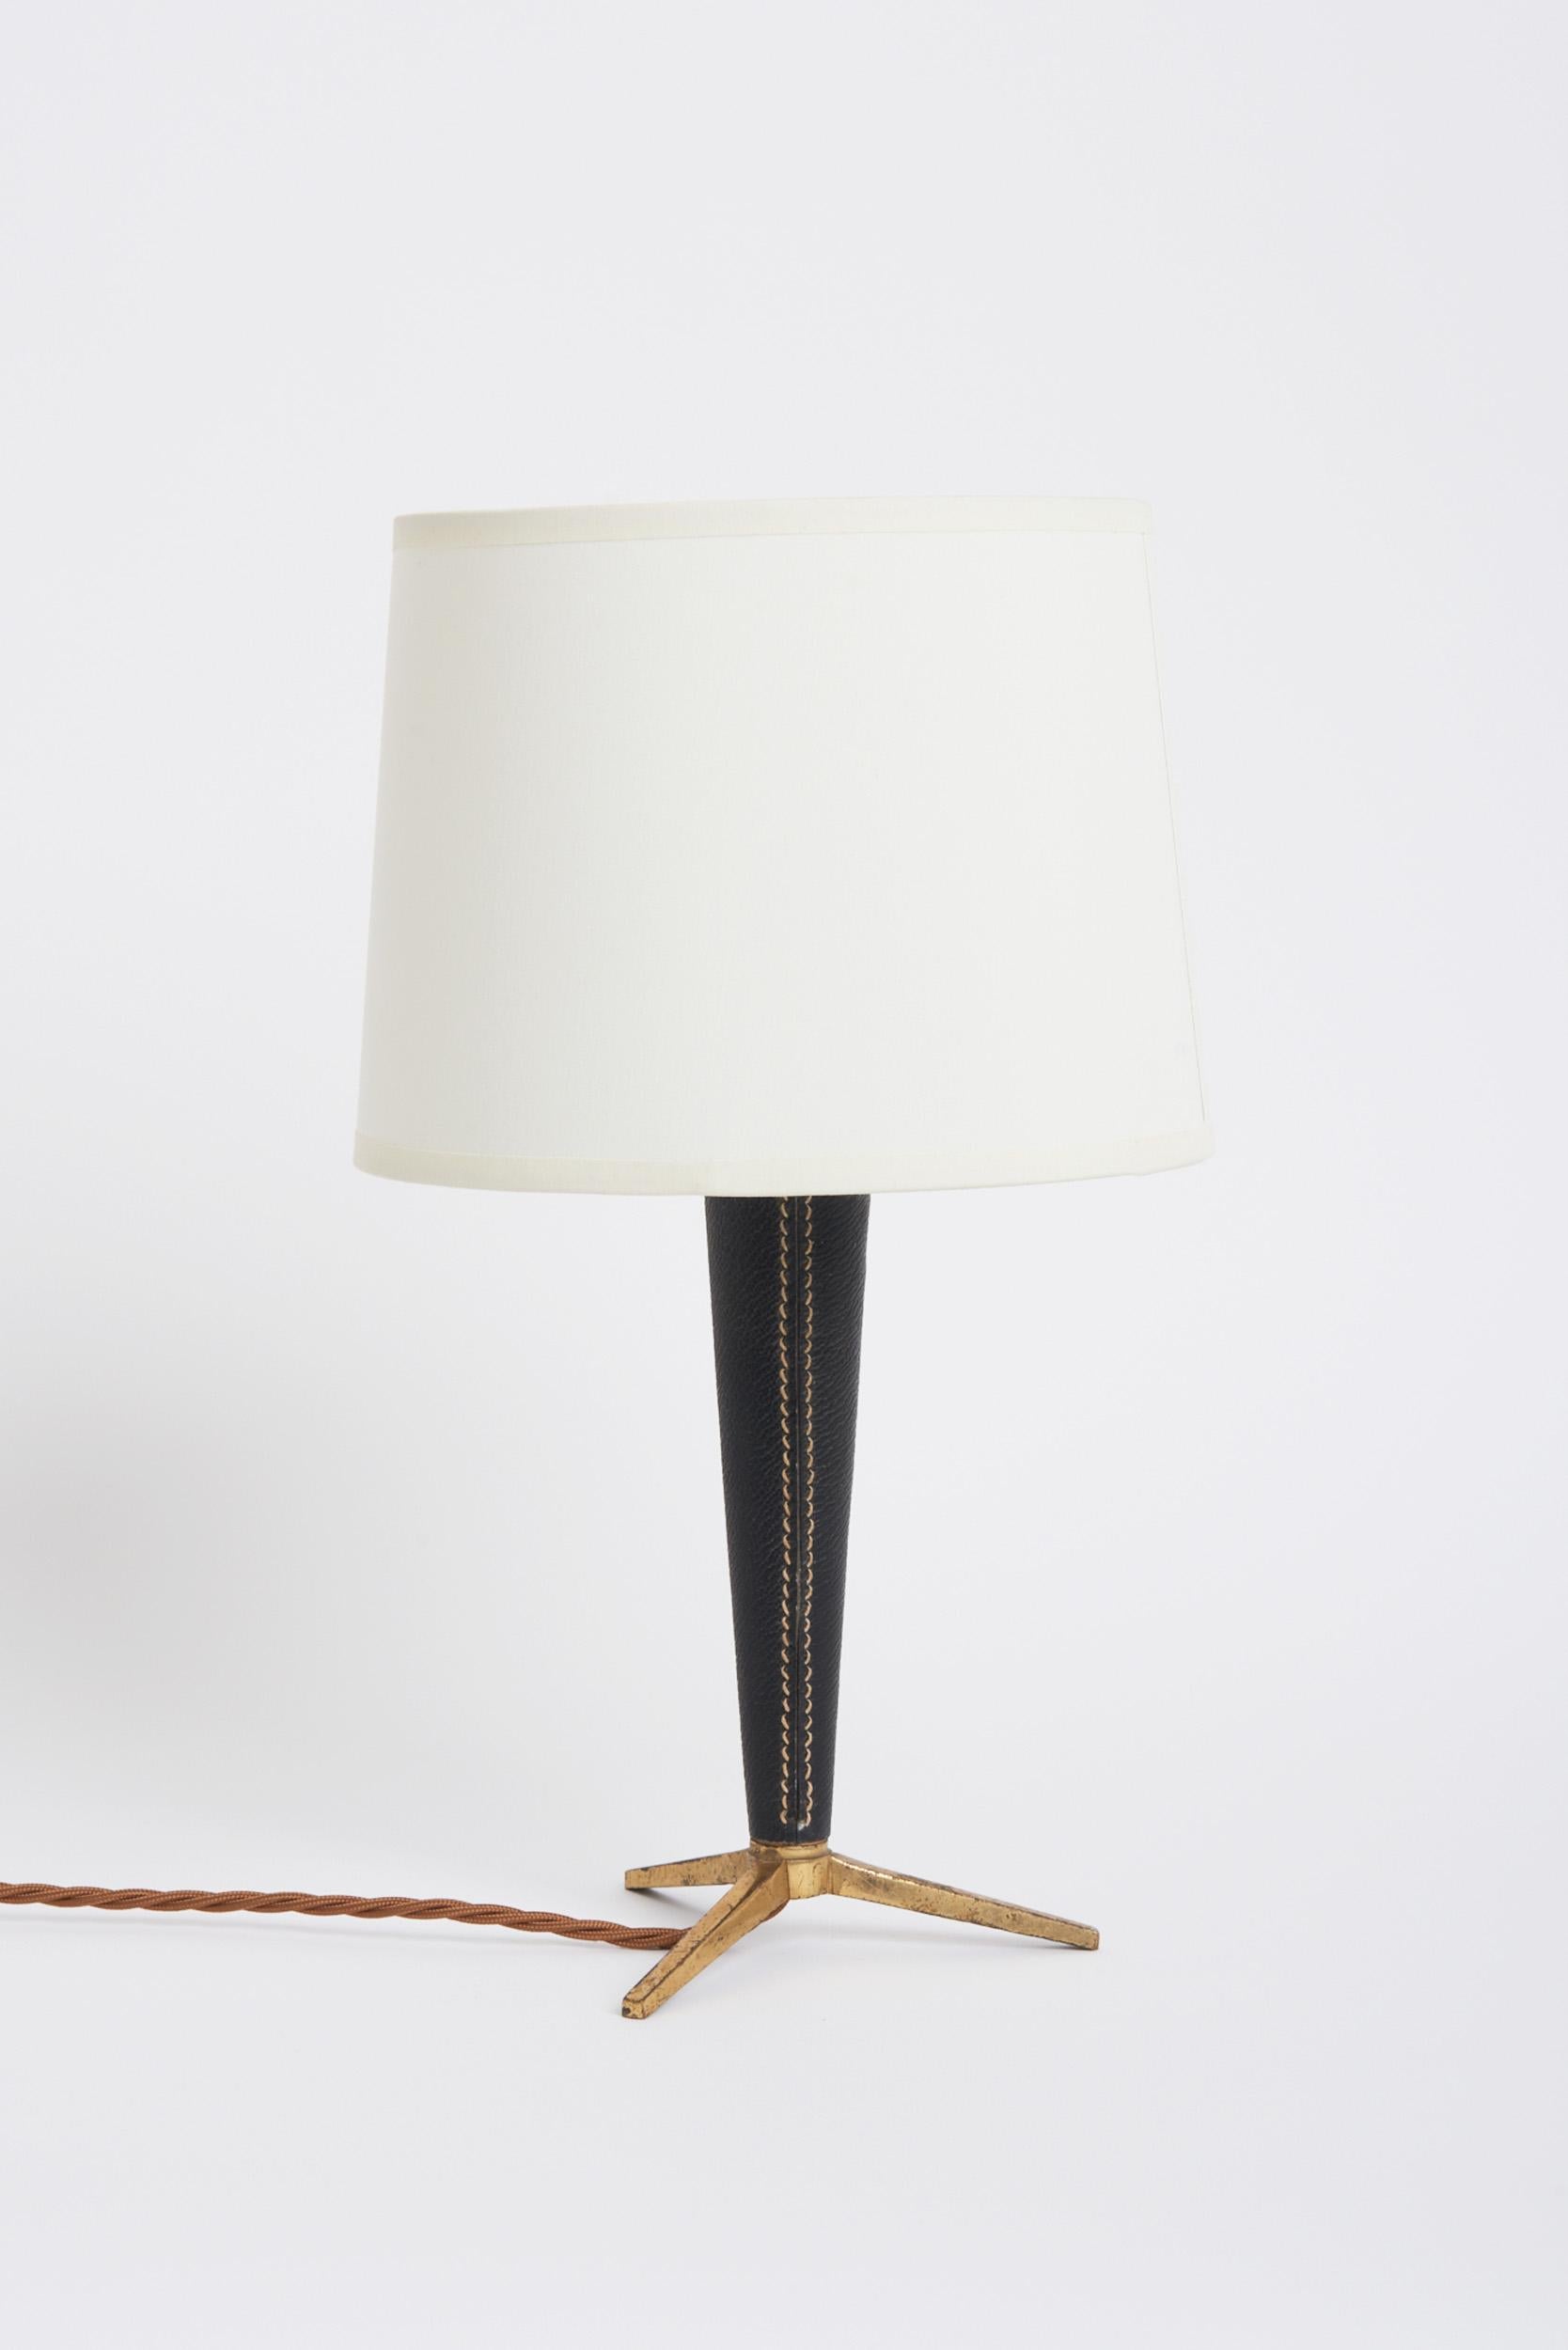 A saddle-stitched black faux lather and brass tripod table lamp.
France, third quarter of the 20th century. 
With the shade: 35 cm high by 20 cm diameter. 
Lamp base only: 25 cm high by 14 cm diameter.